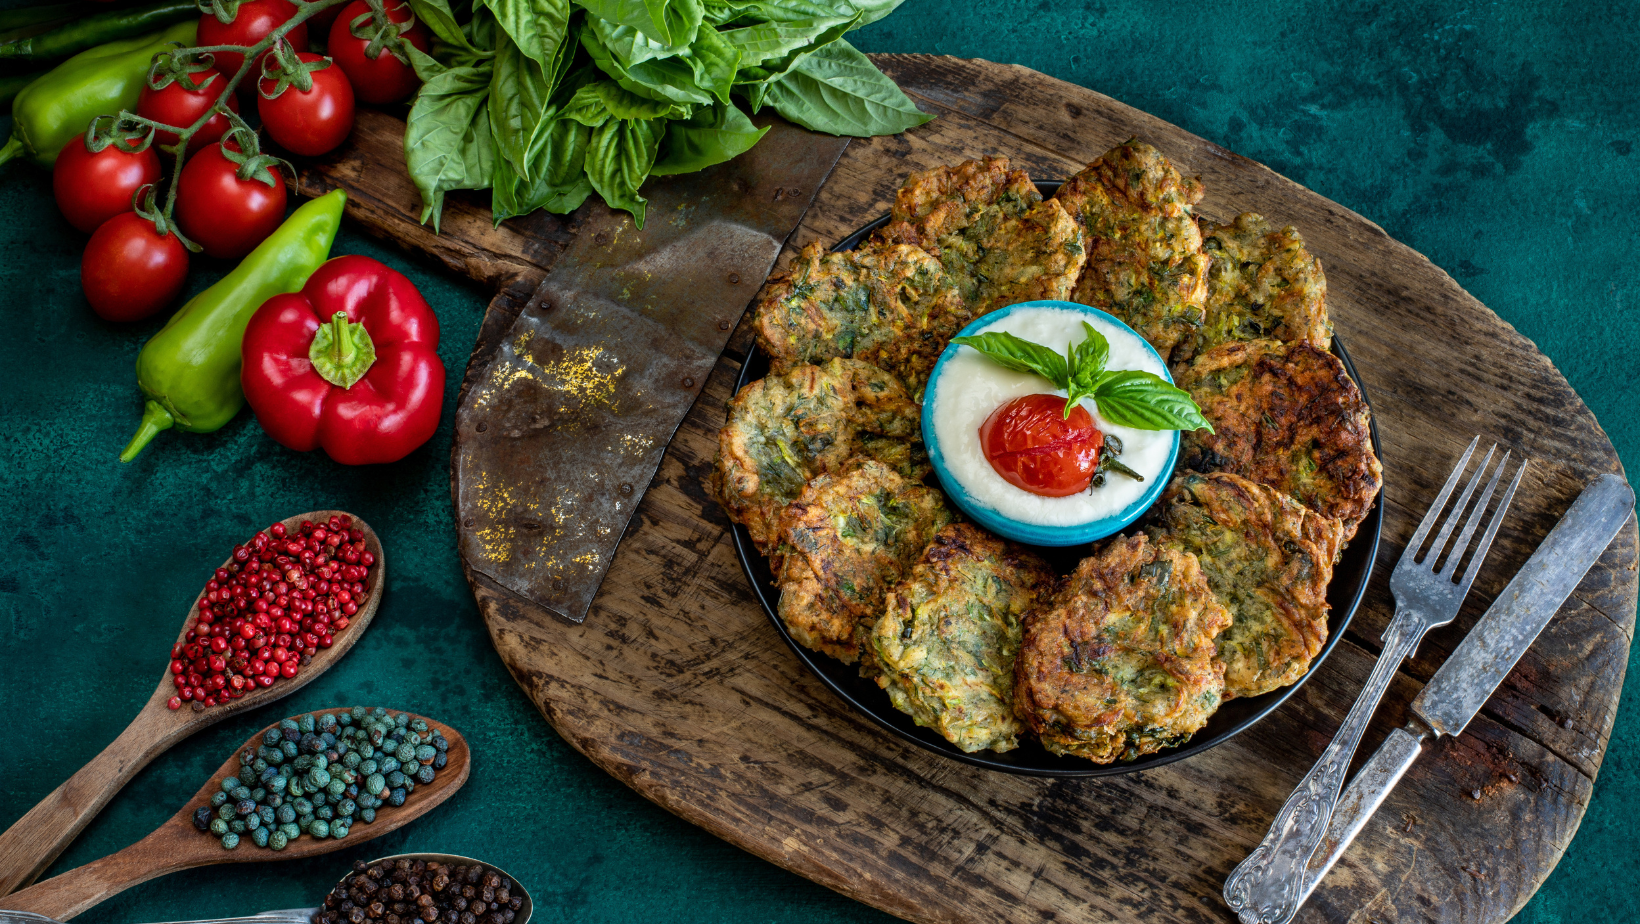 Many zucchini fritters in the plate with white sauce.